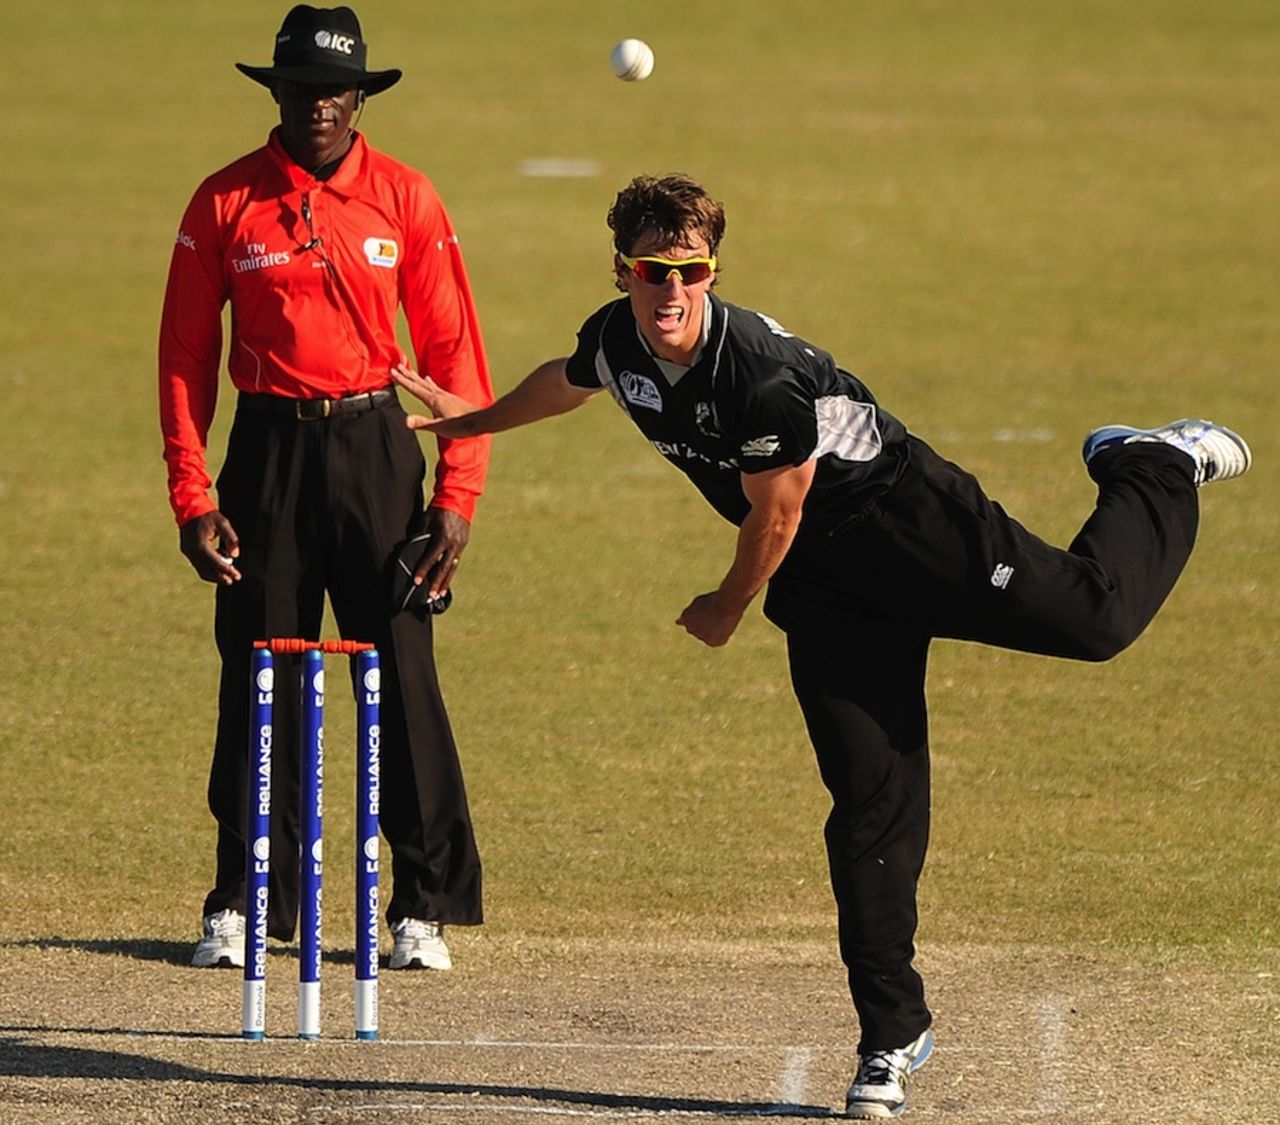 Theo van Woerkom in his bowling action, New Zealand v Pakistan, Group B, ICC Under-19 World Cup, Buderim, August 16, 2012